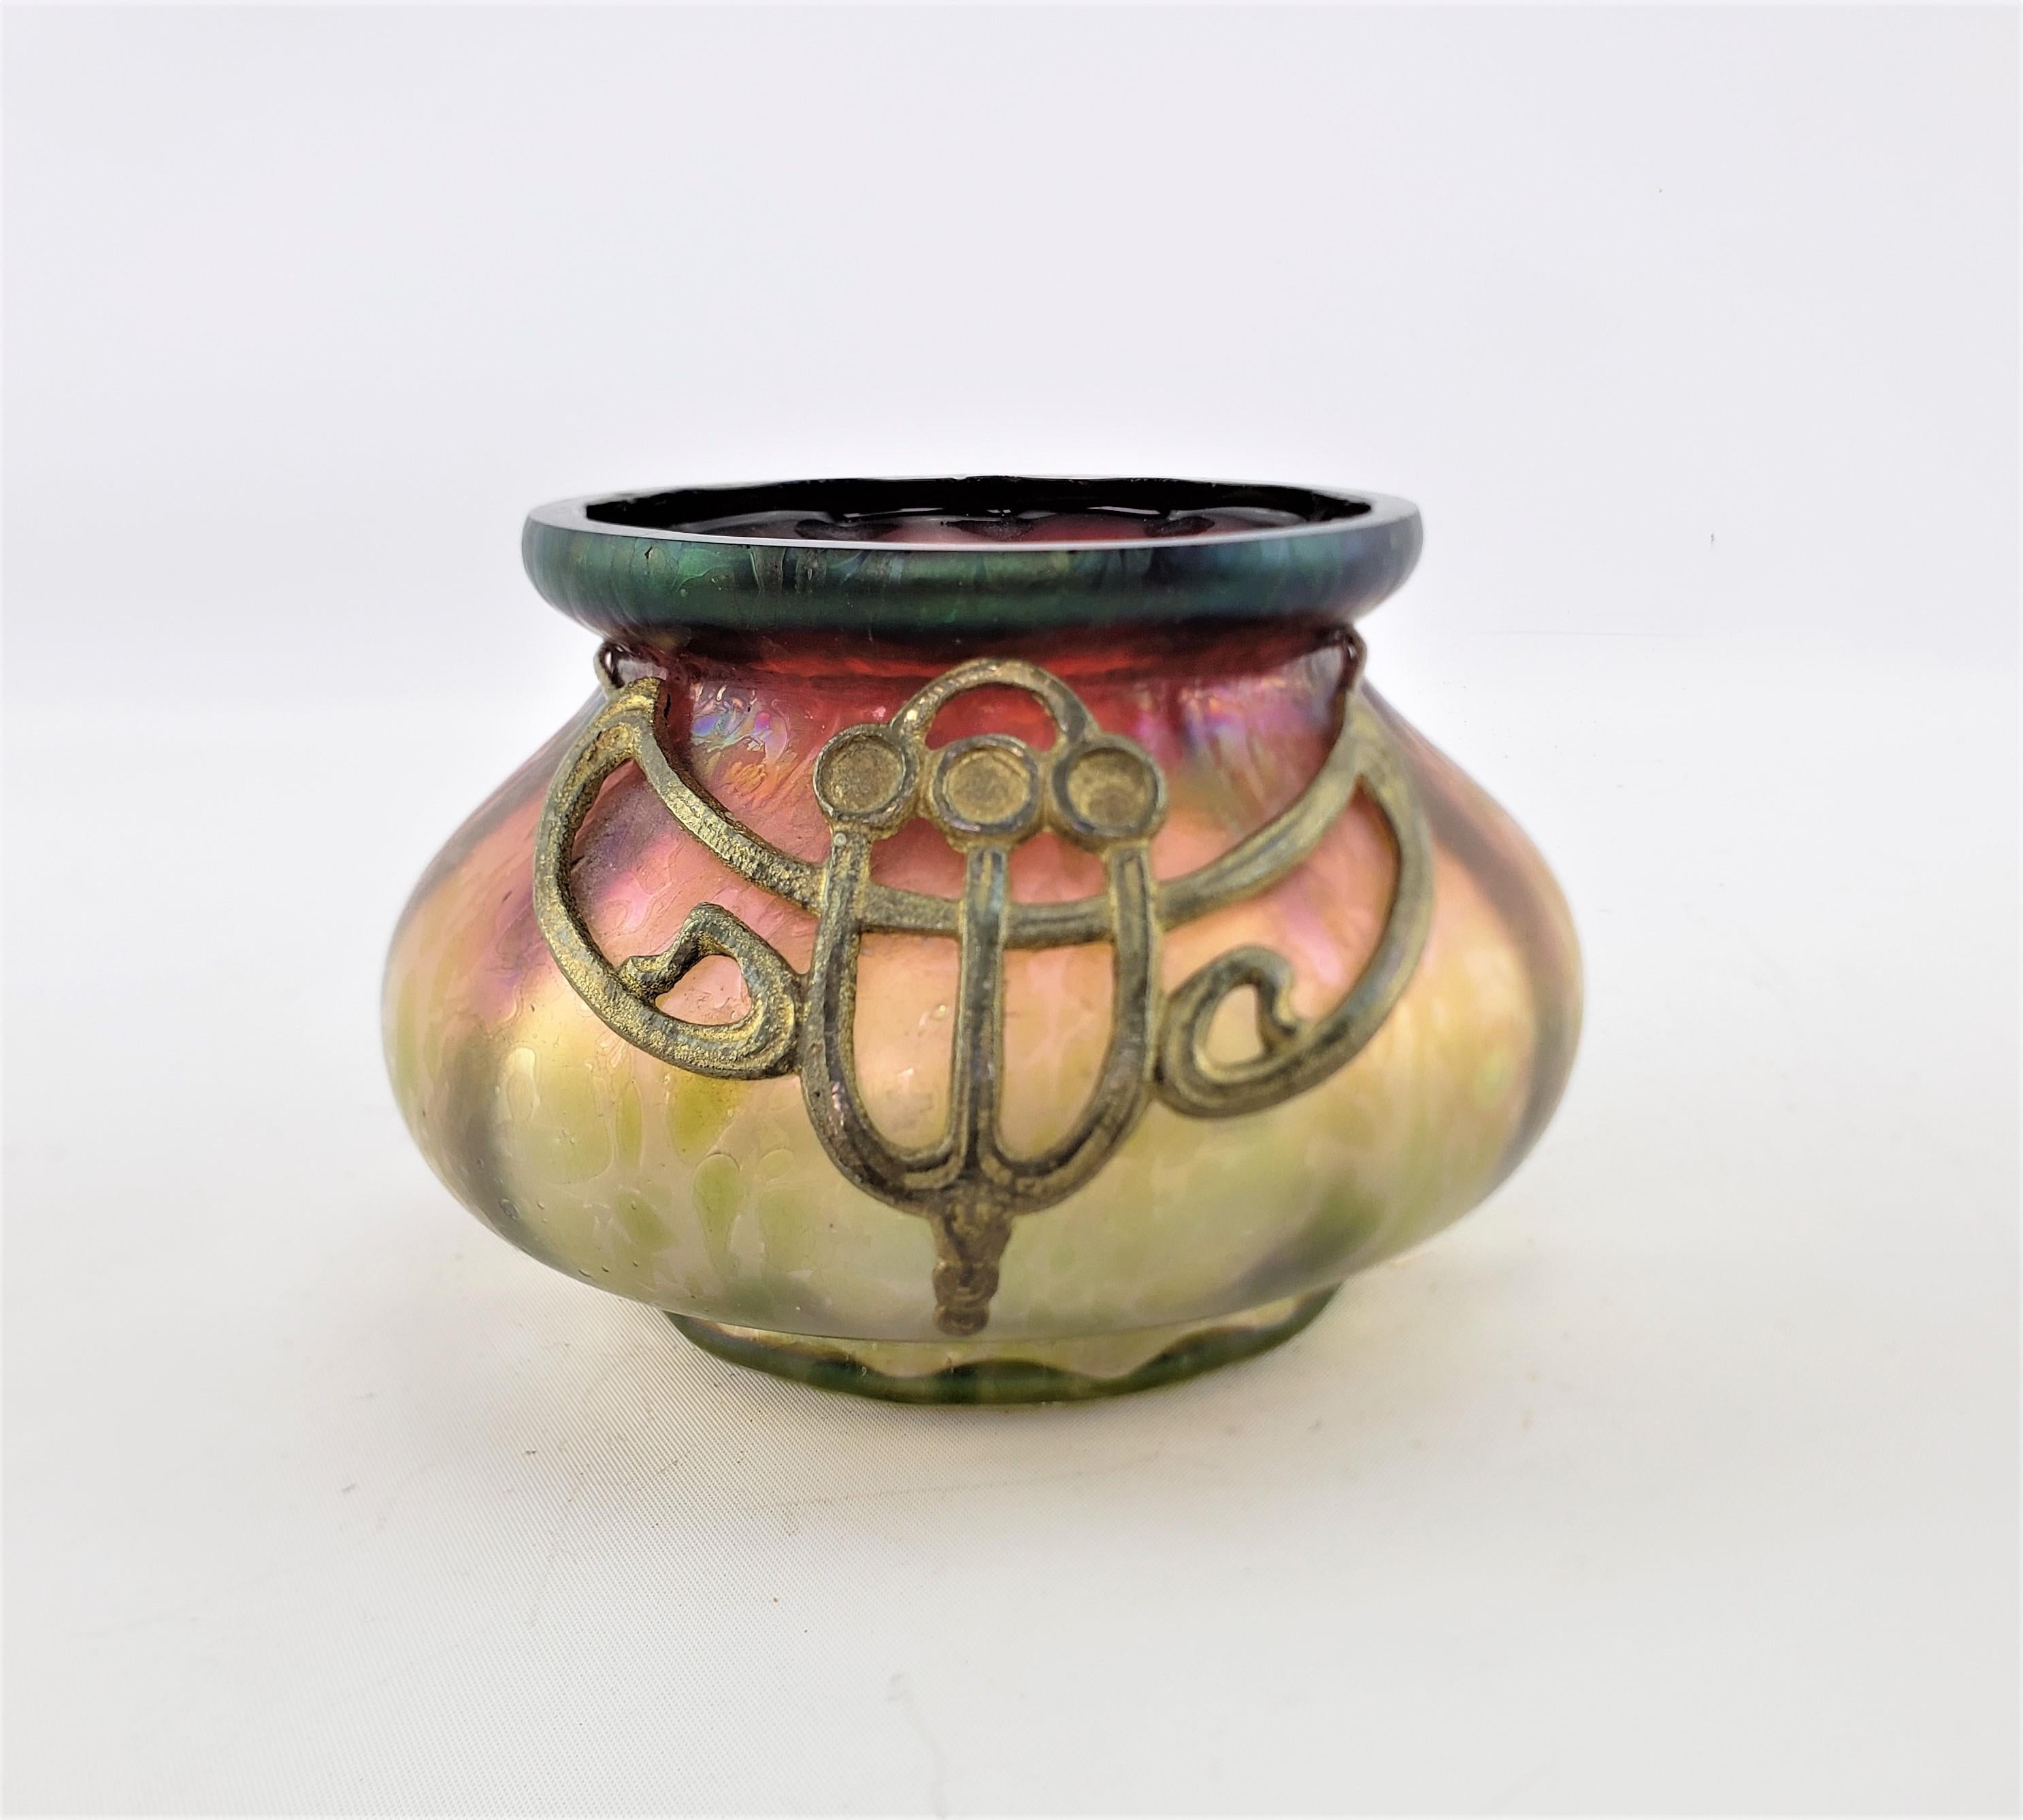 This antique art glass vase is unsigned, but presumed to have originated from Austria and dates to approximately 1900 and done in the period Art Nouveau style. The vase is done in multi colors with strong iridescence and has a hand hammered cast